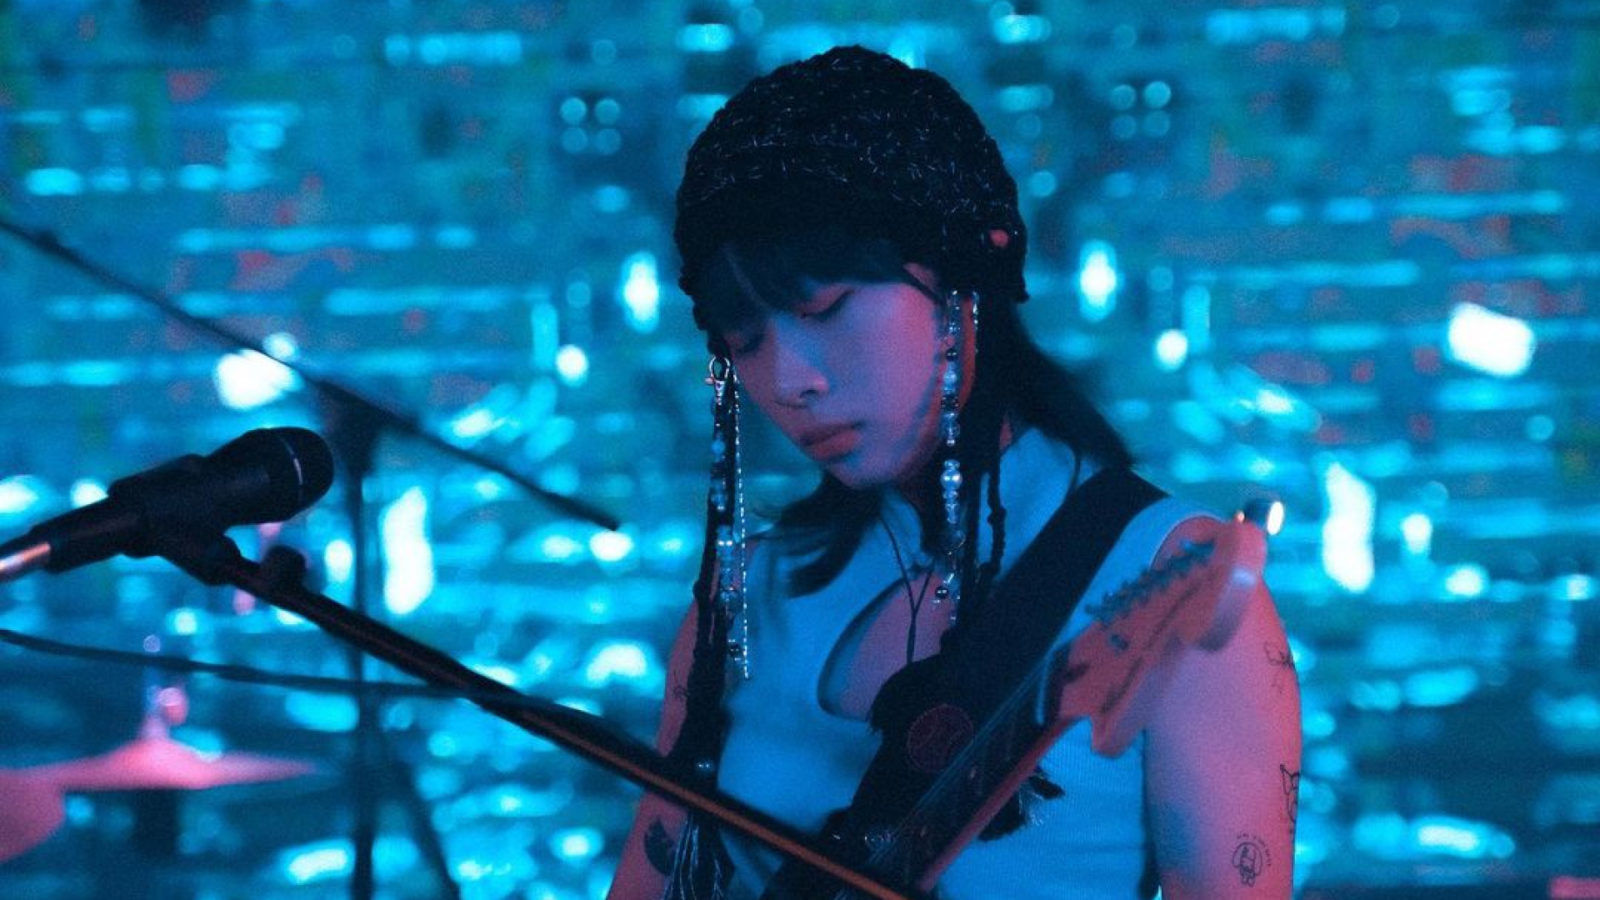 13 rising Hong Kong female musicians to add to your playlist in 2022